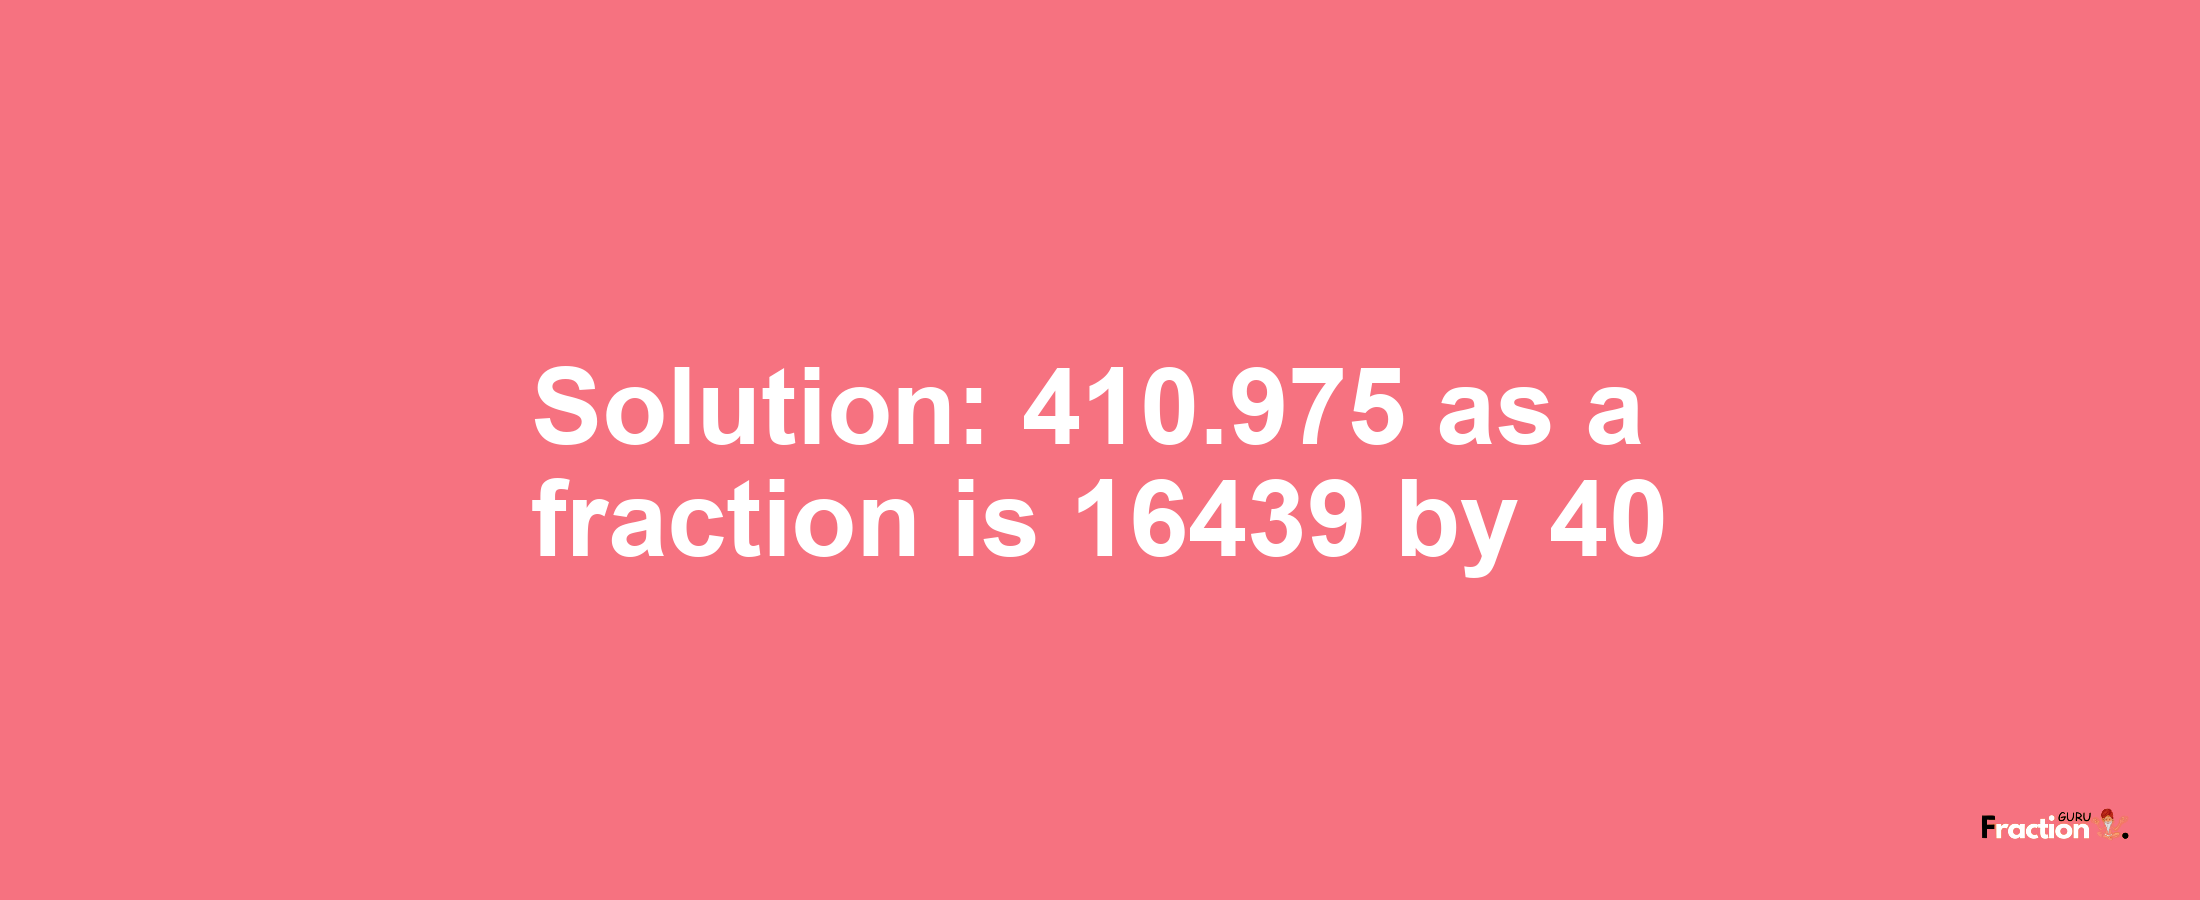 Solution:410.975 as a fraction is 16439/40